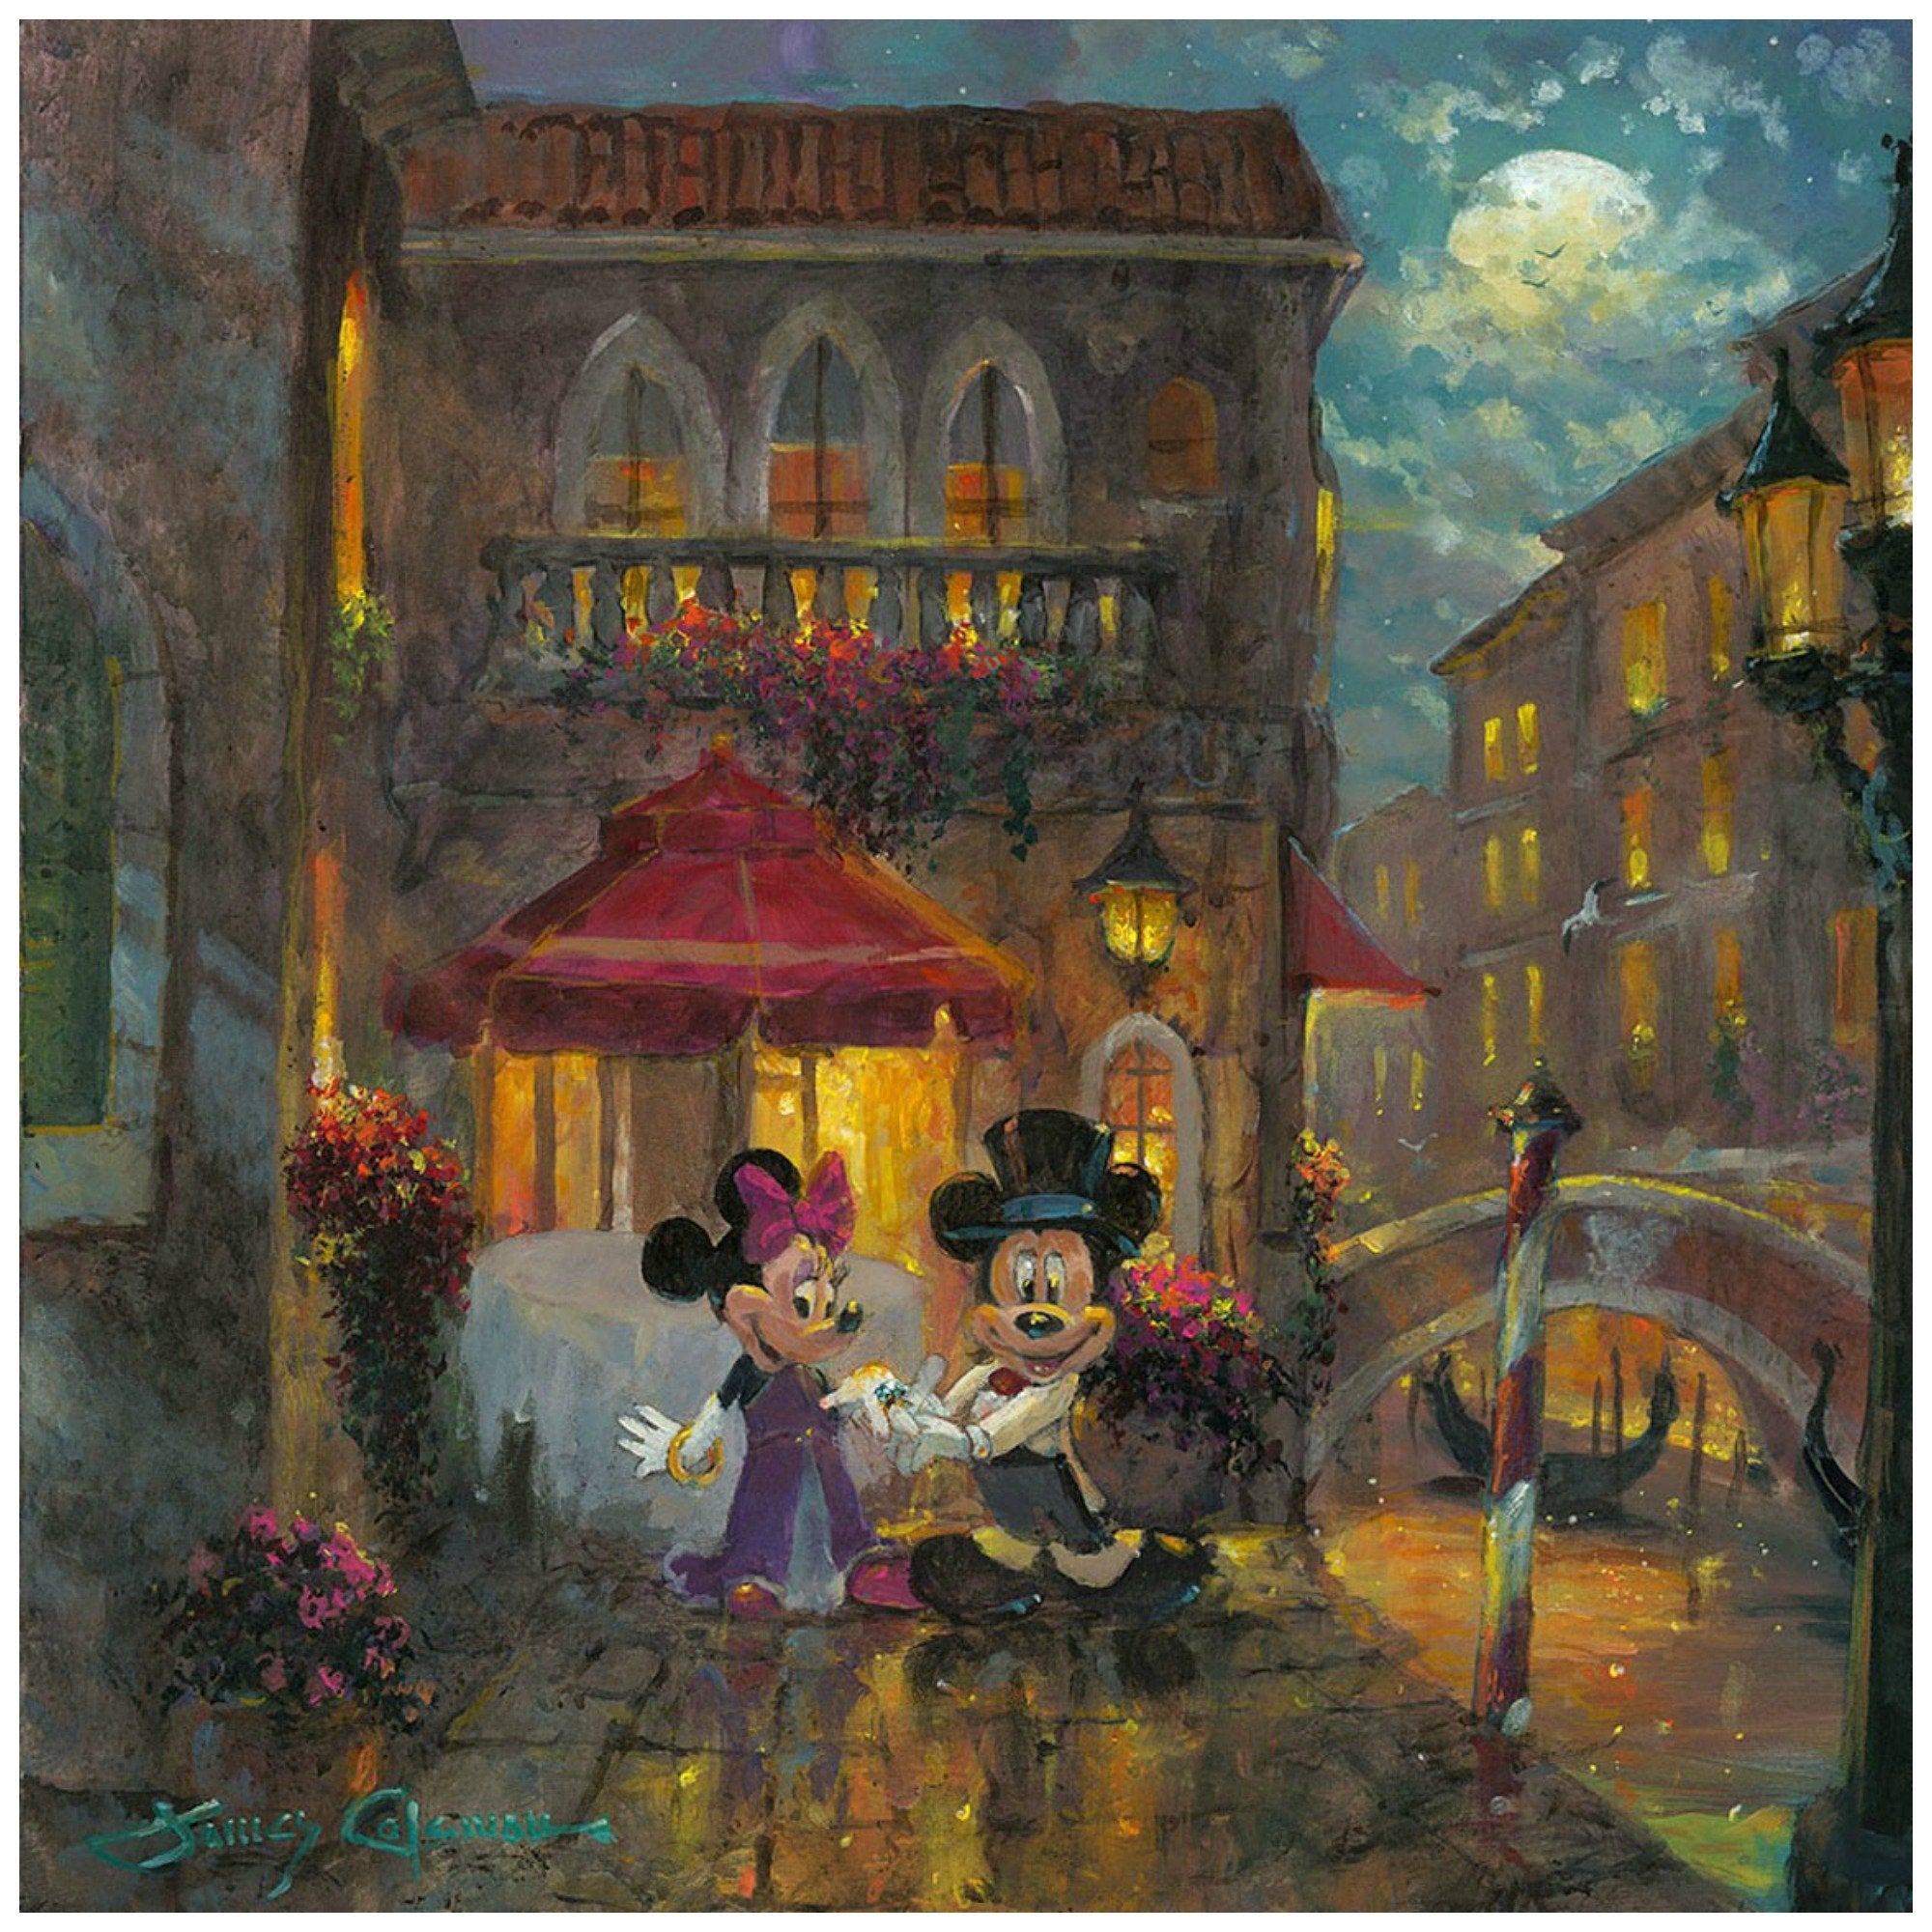 Evening Anniversary by James Coleman  Mickey and Minnie all dressed up for an evening to celebrate their anniversary in the romantic city of Venice.